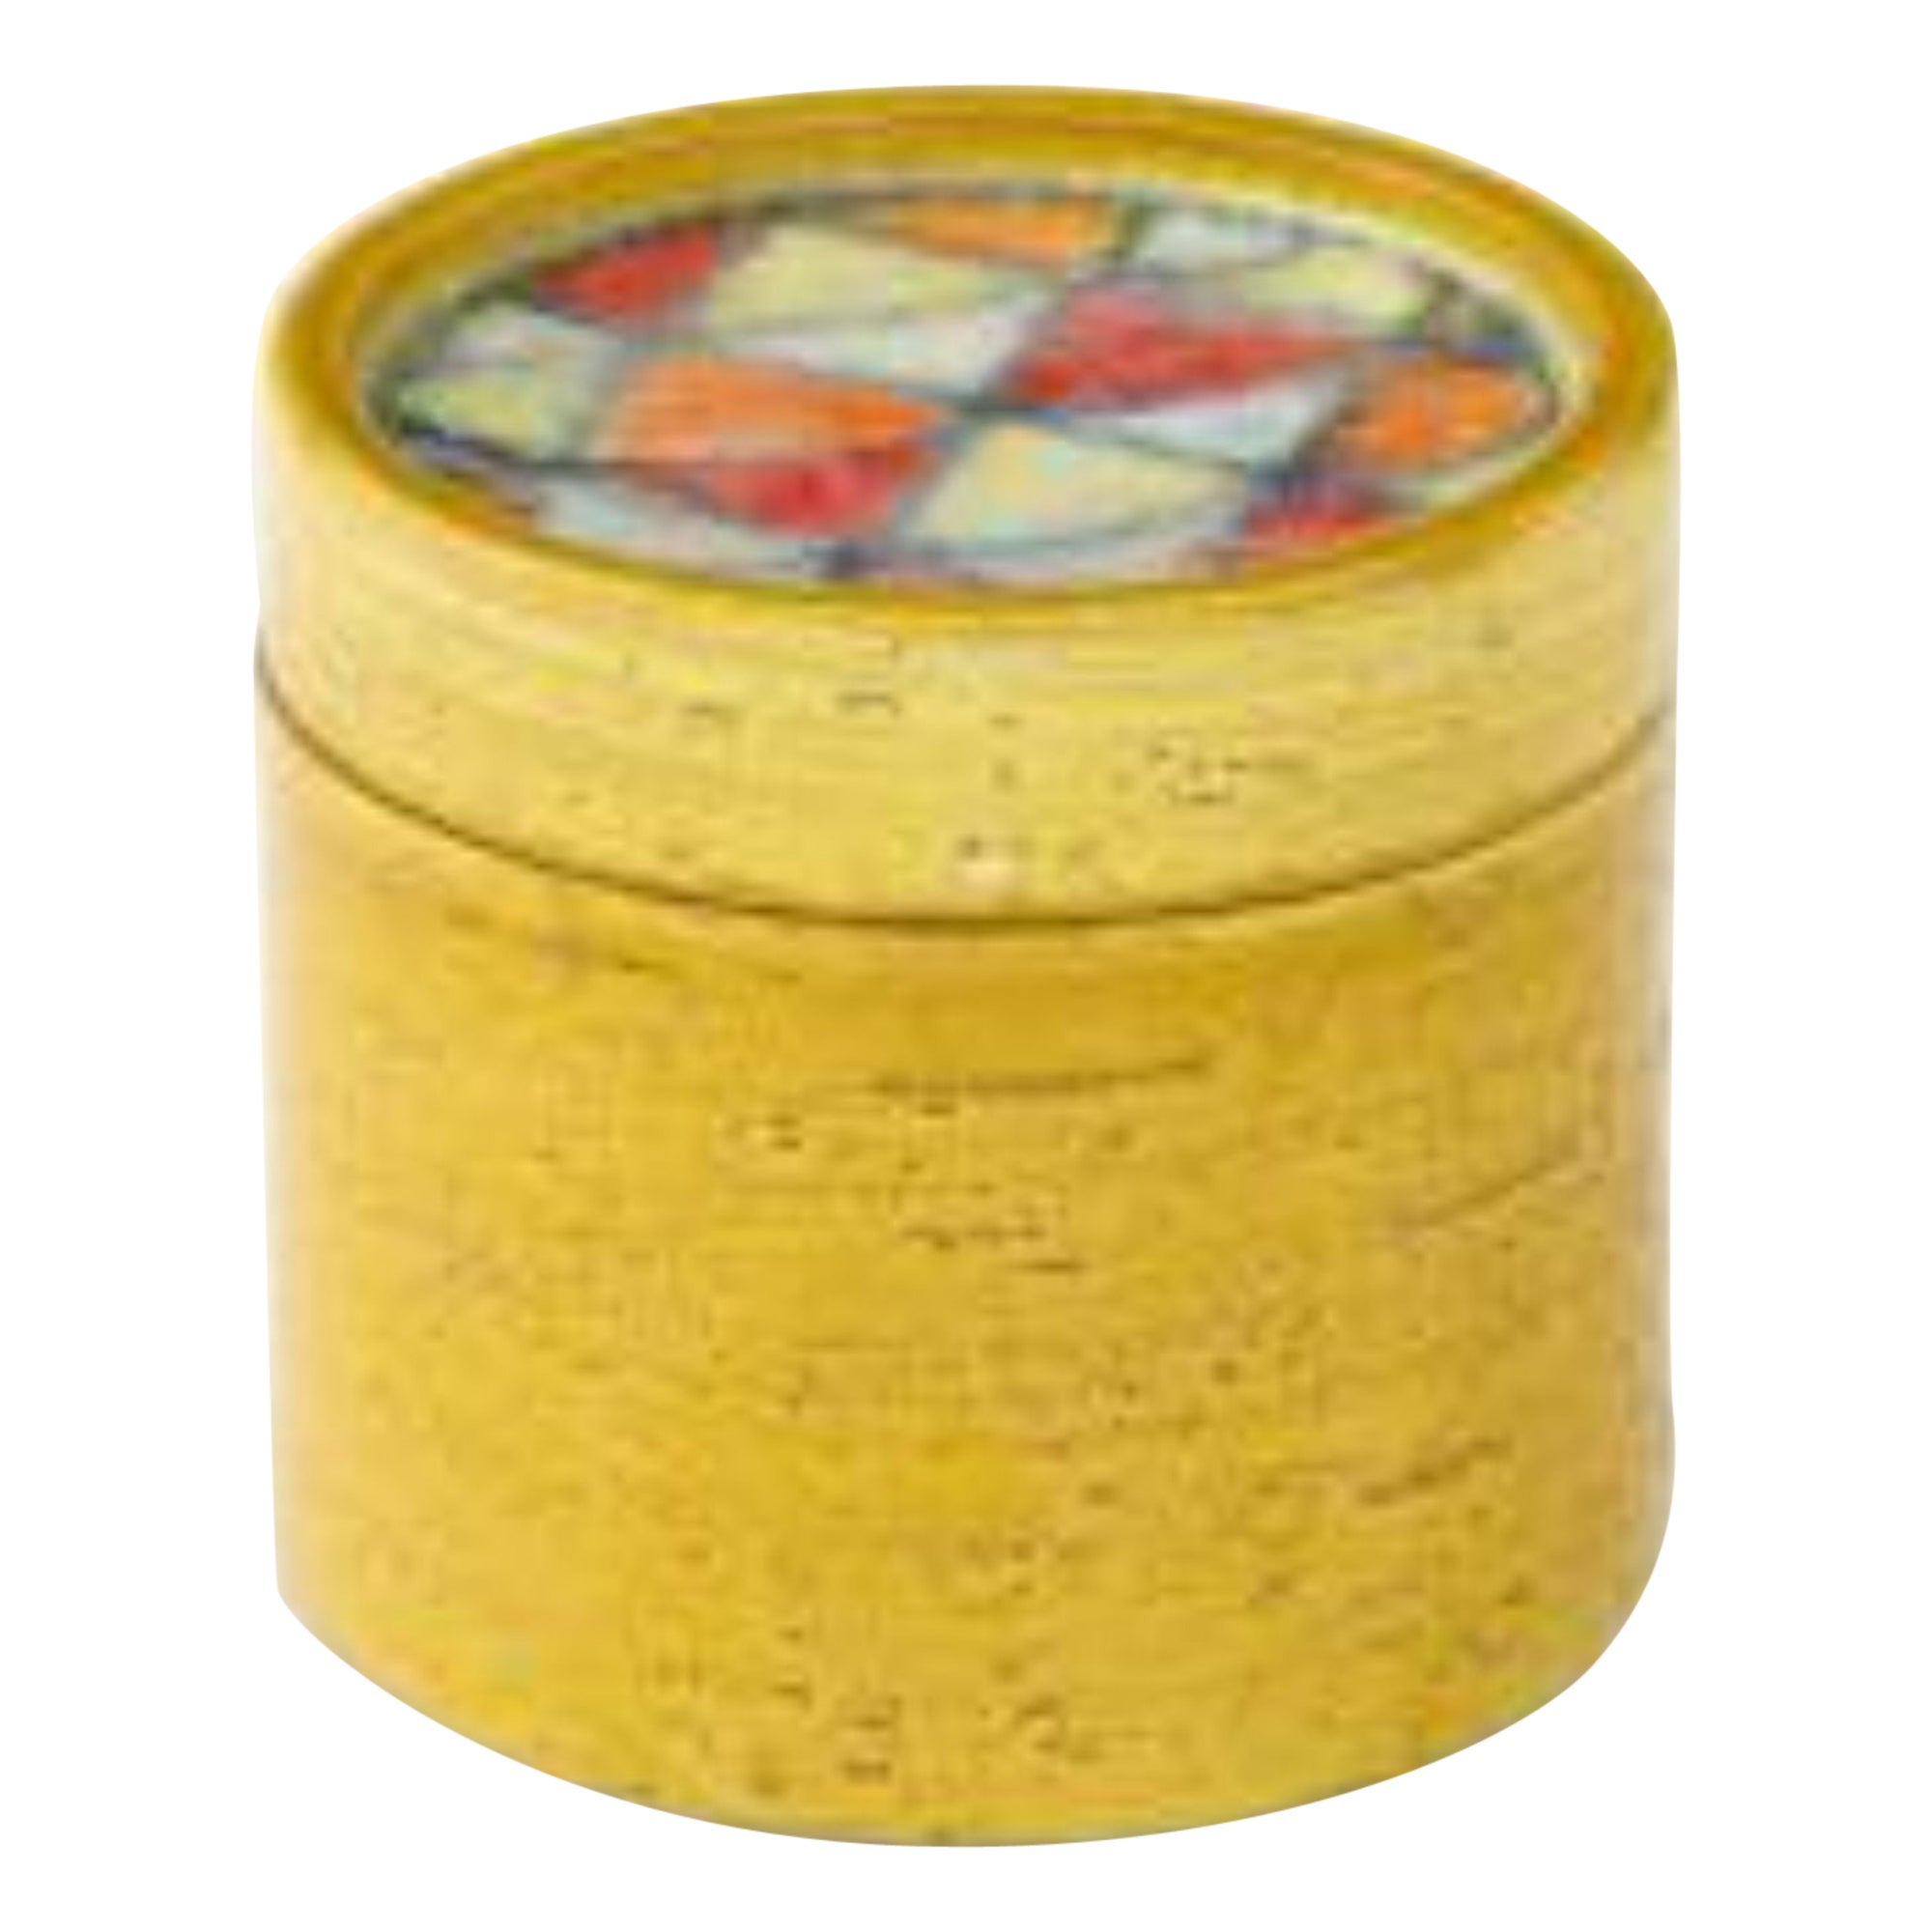 Bitossi Lidded Box in Glazed Ceramic with Fused Glass Mosaic, circa 1960s For Sale